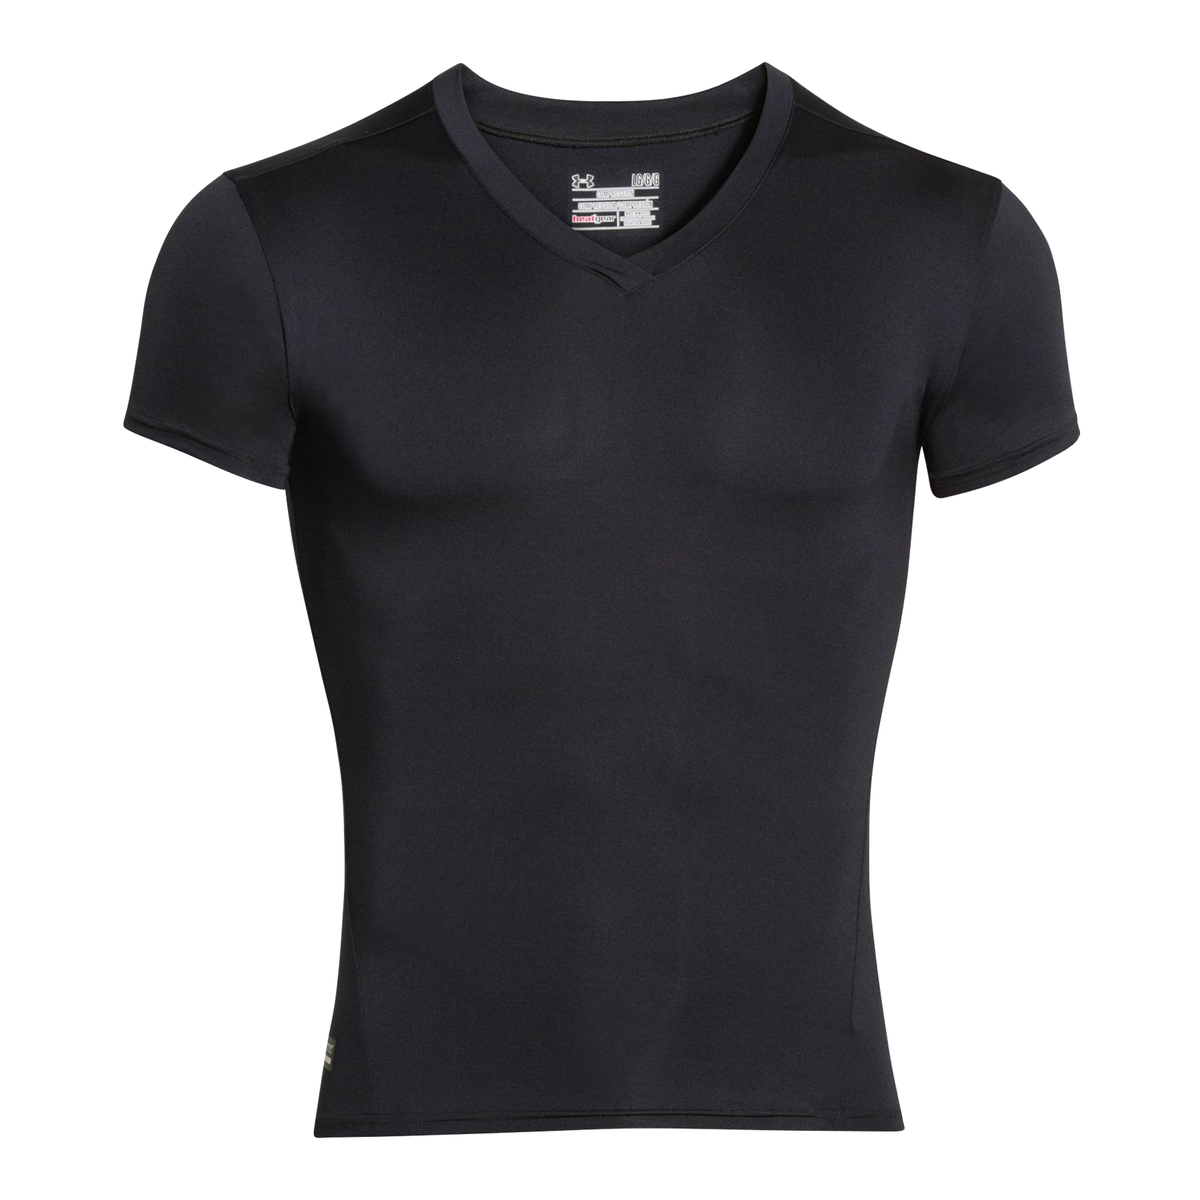 under armour tactical shirt compression